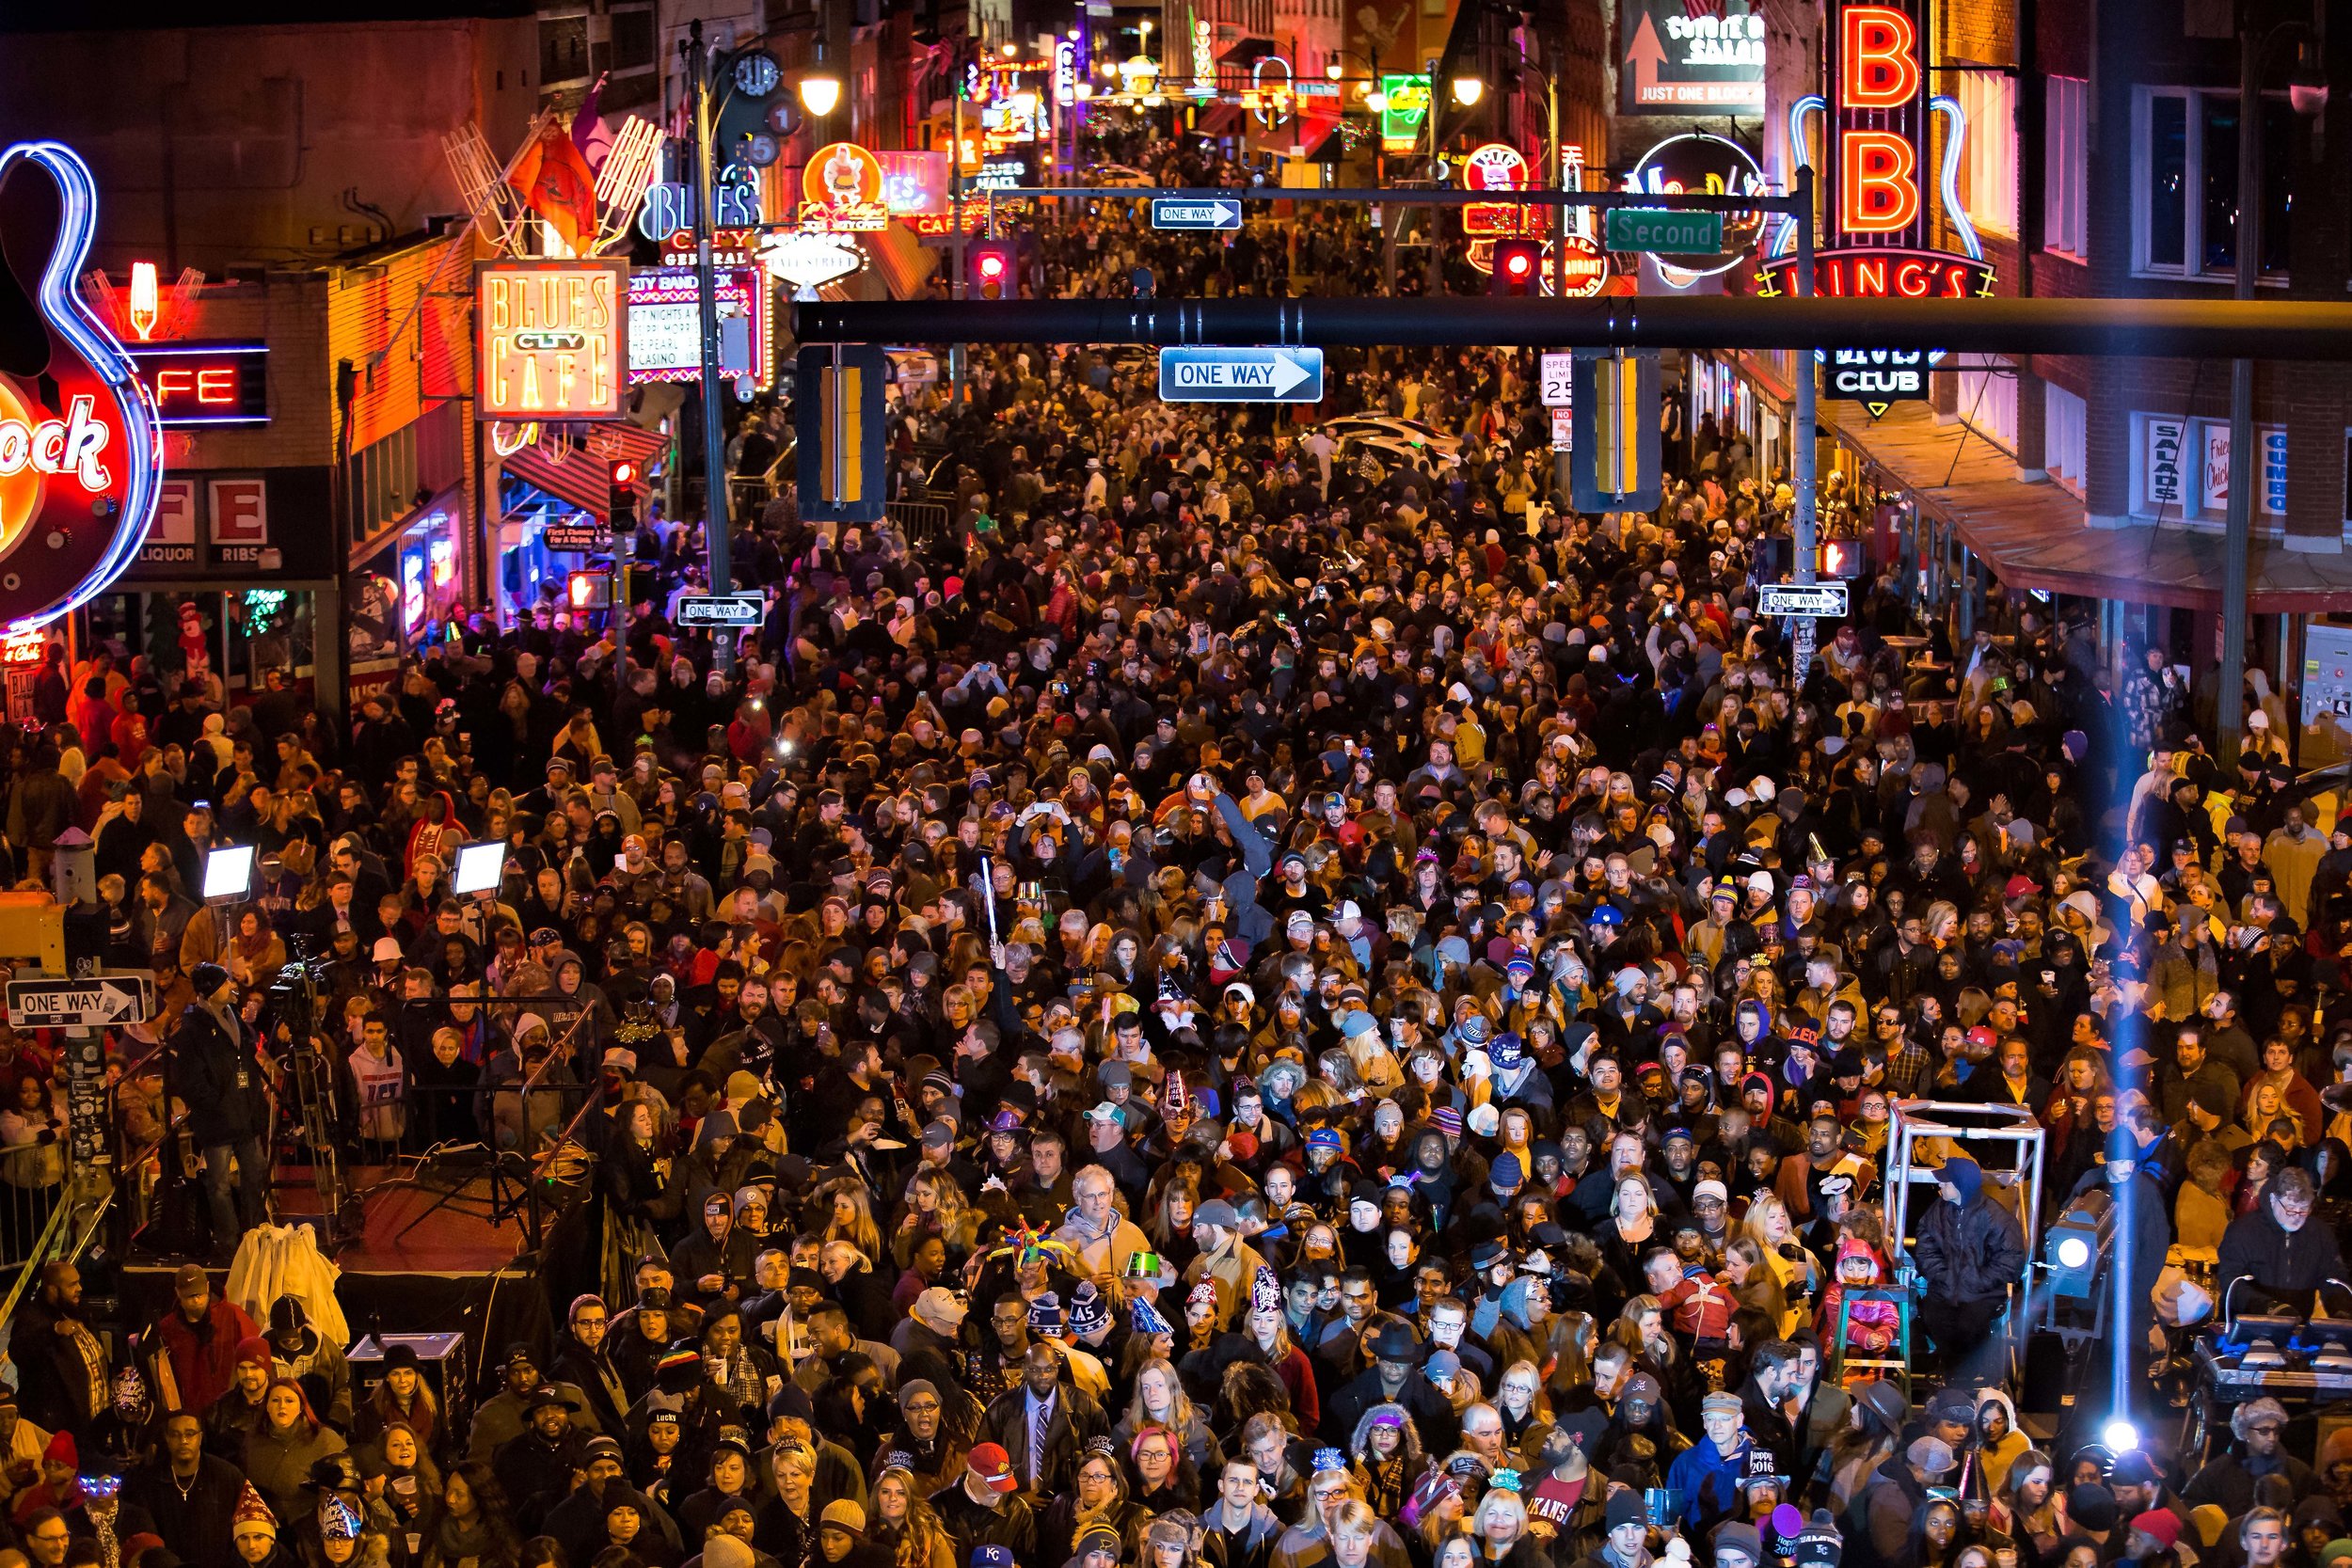 New Years Eve on Beale — Beale Street